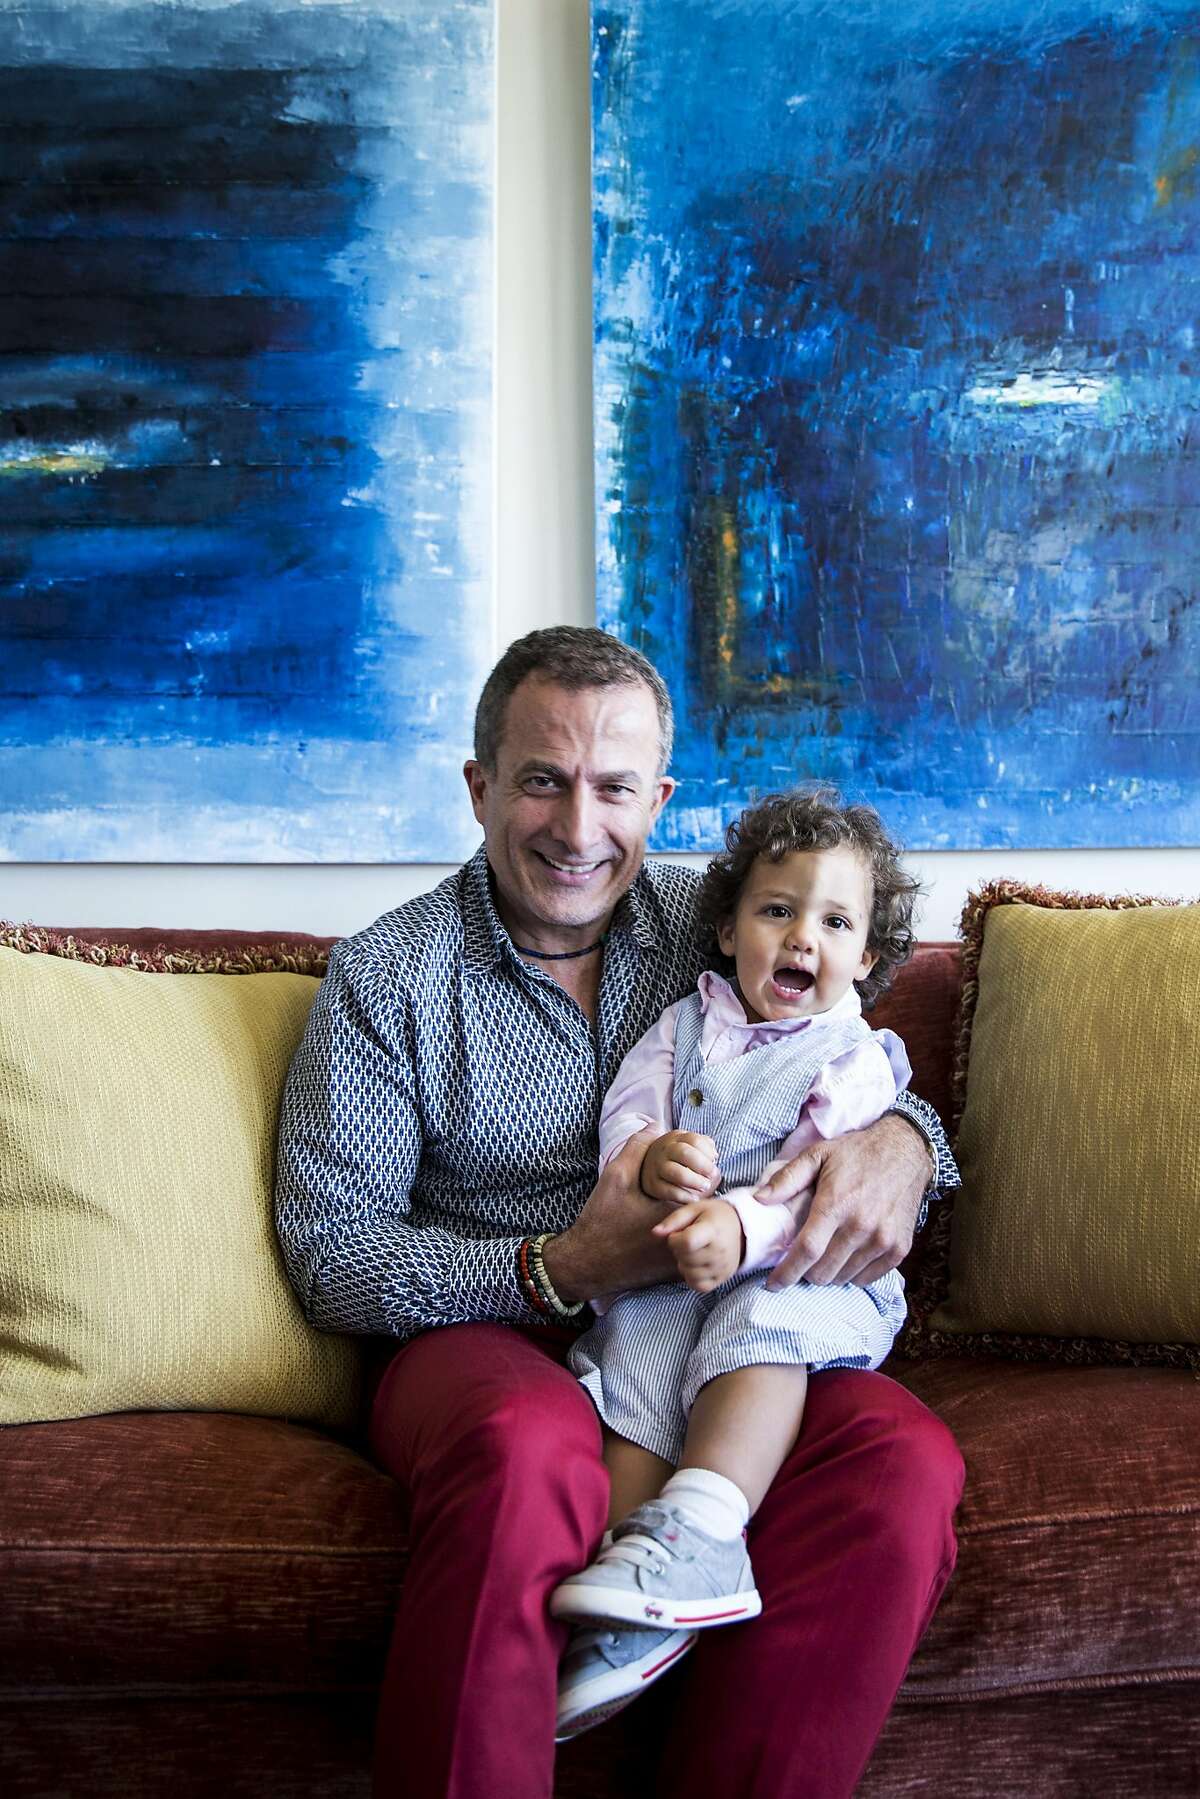 Jorge Maumer, a real estate developer and single gay dad, poses for a portrait with his son Augustine, who was conceived through a gestational carrier in Panama after two previously unsuccessful attempts, at their home in San Francisco, Calif. on Friday, May 5, 2017.